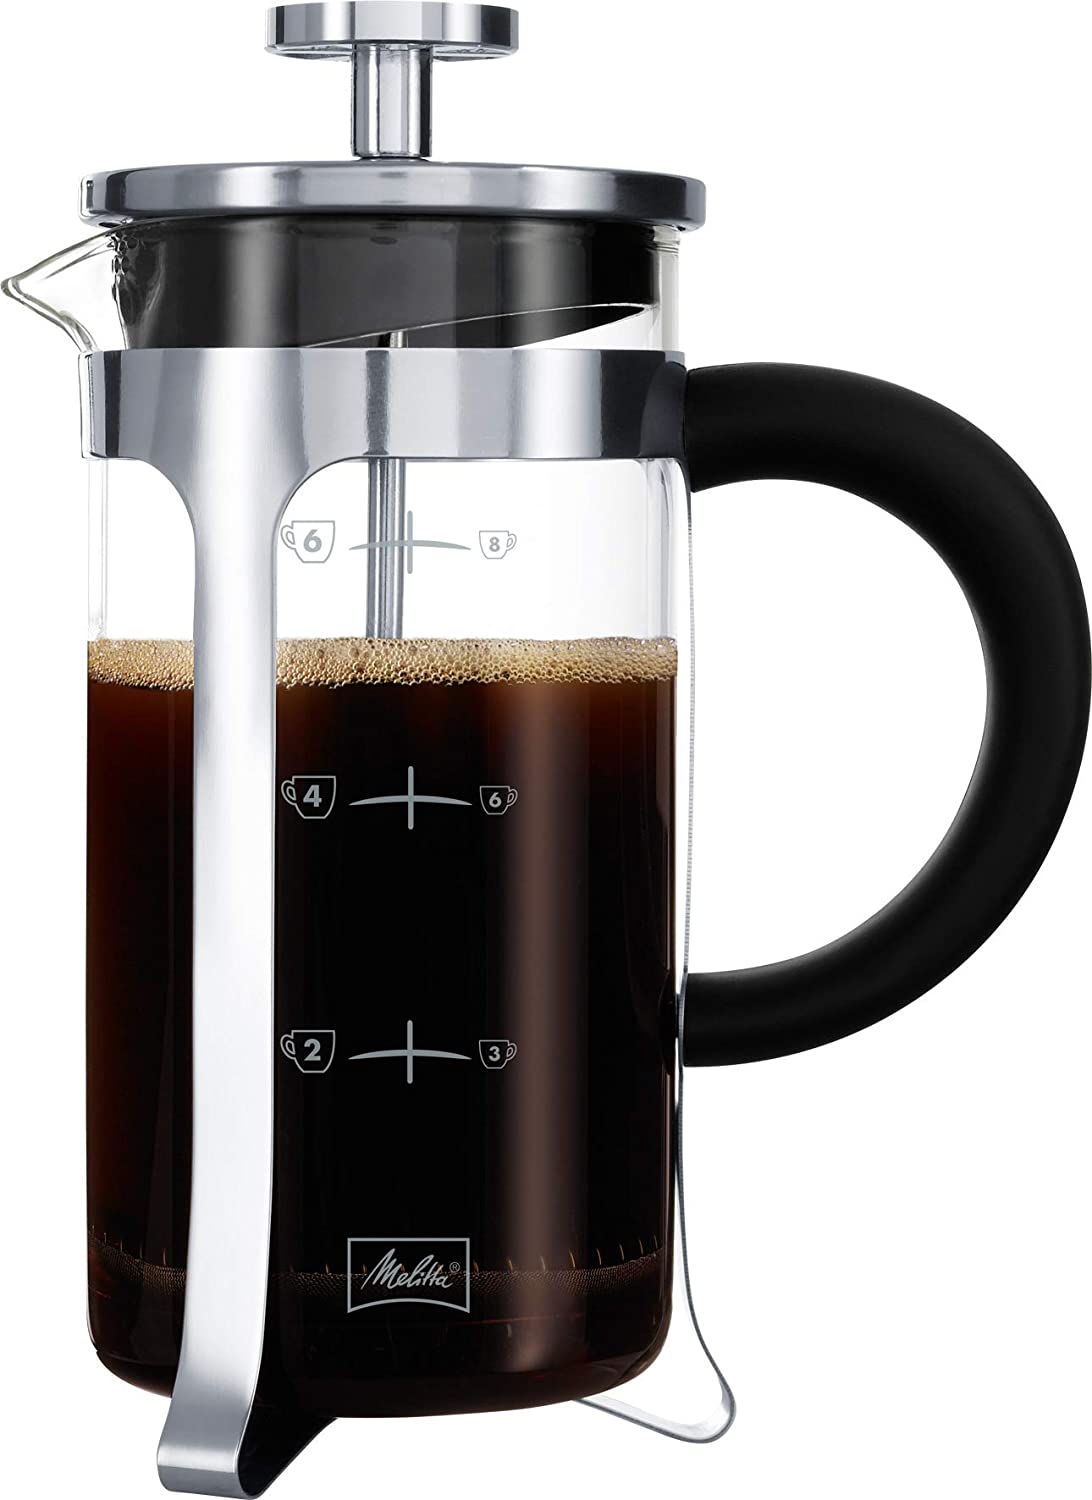 Melitta Manual Coffee Maker – 8 Cup Cafetiere – Chrome